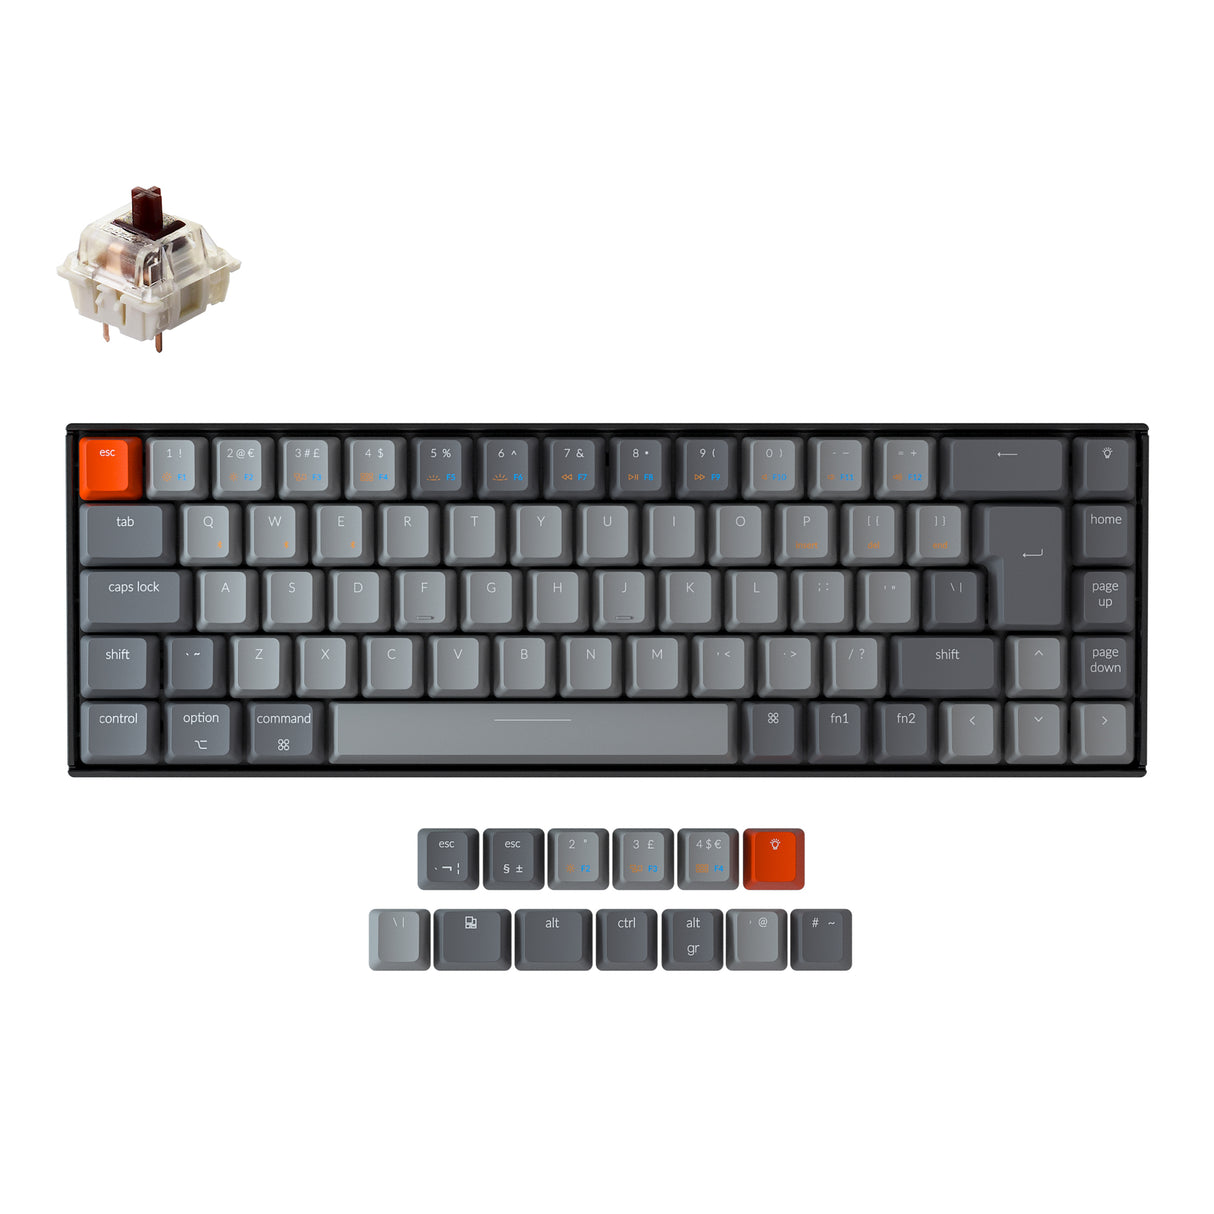 Keychron K6 65 percent compact wireless mechanical keyboard for Mac Windows iPad tablet UK ISO layout Gateron mechanical brown switch with RGB backlight and hot-swappable